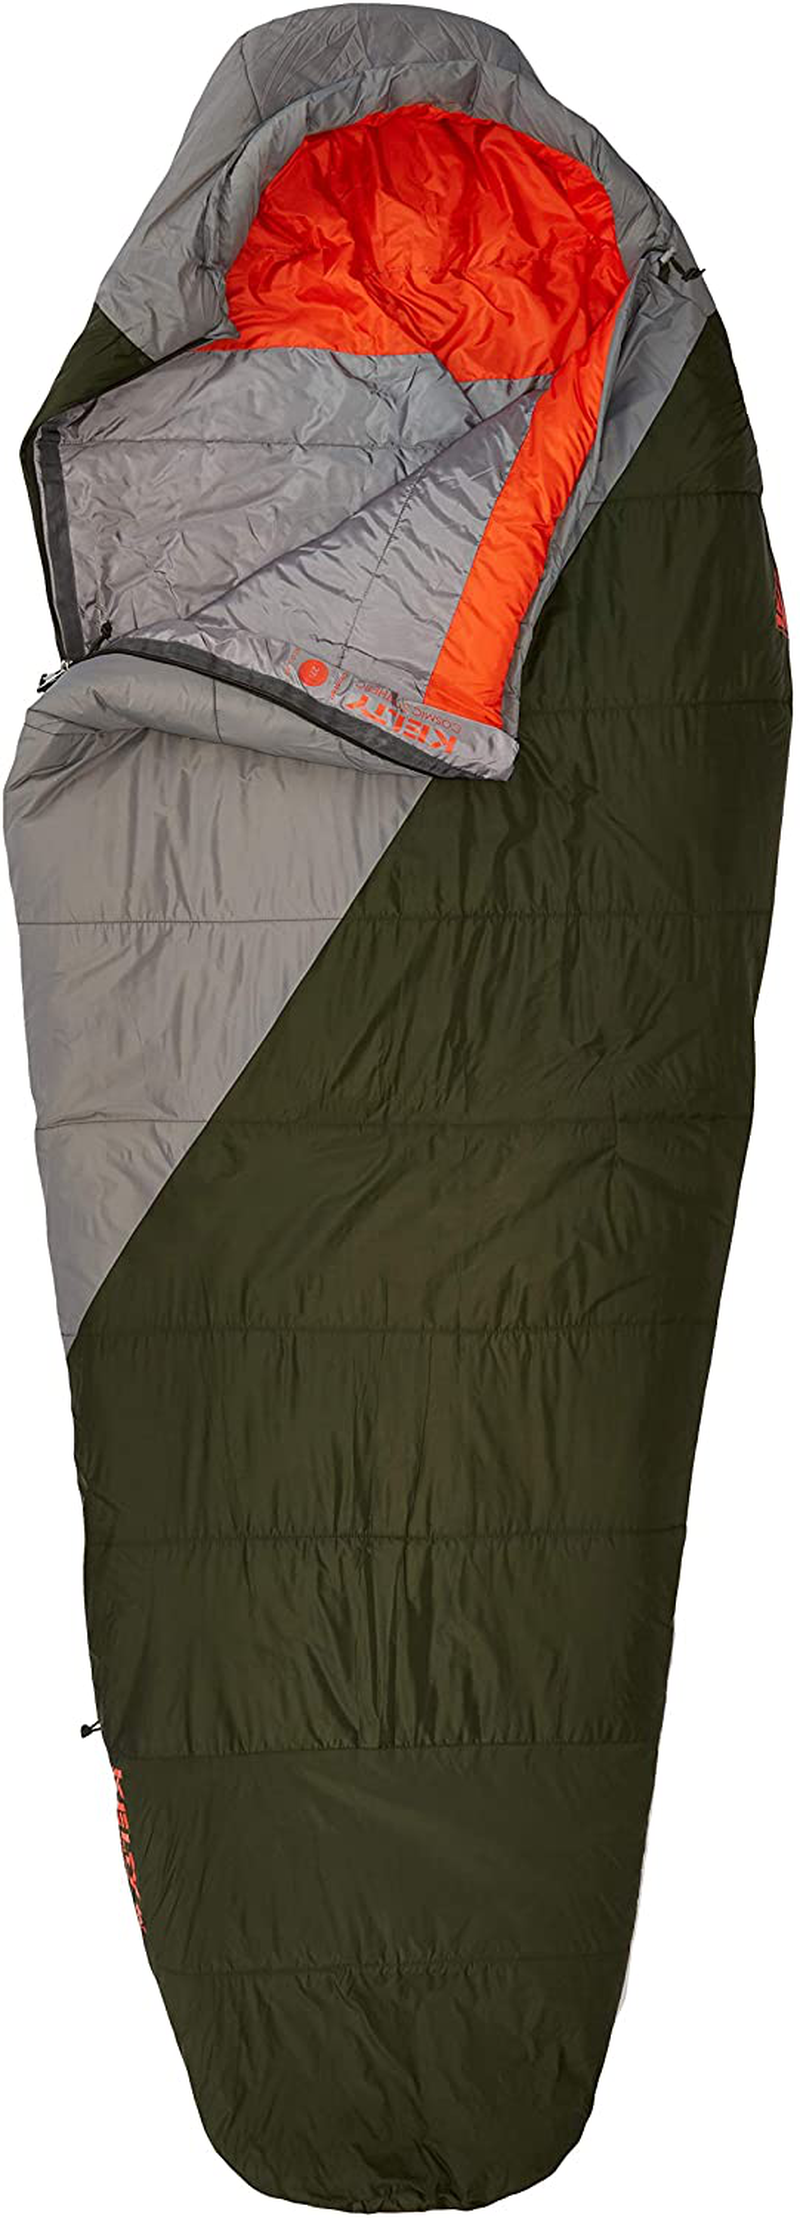 Kelty Cosmic Synthetic Fill 40 Degree Backpacking Sleeping Bag, Long – Compression Straps, Stuff Sack Included Sporting Goods > Outdoor Recreation > Camping & Hiking > Sleeping BagsSporting Goods > Outdoor Recreation > Camping & Hiking > Sleeping Bags Kelty Green Regular 